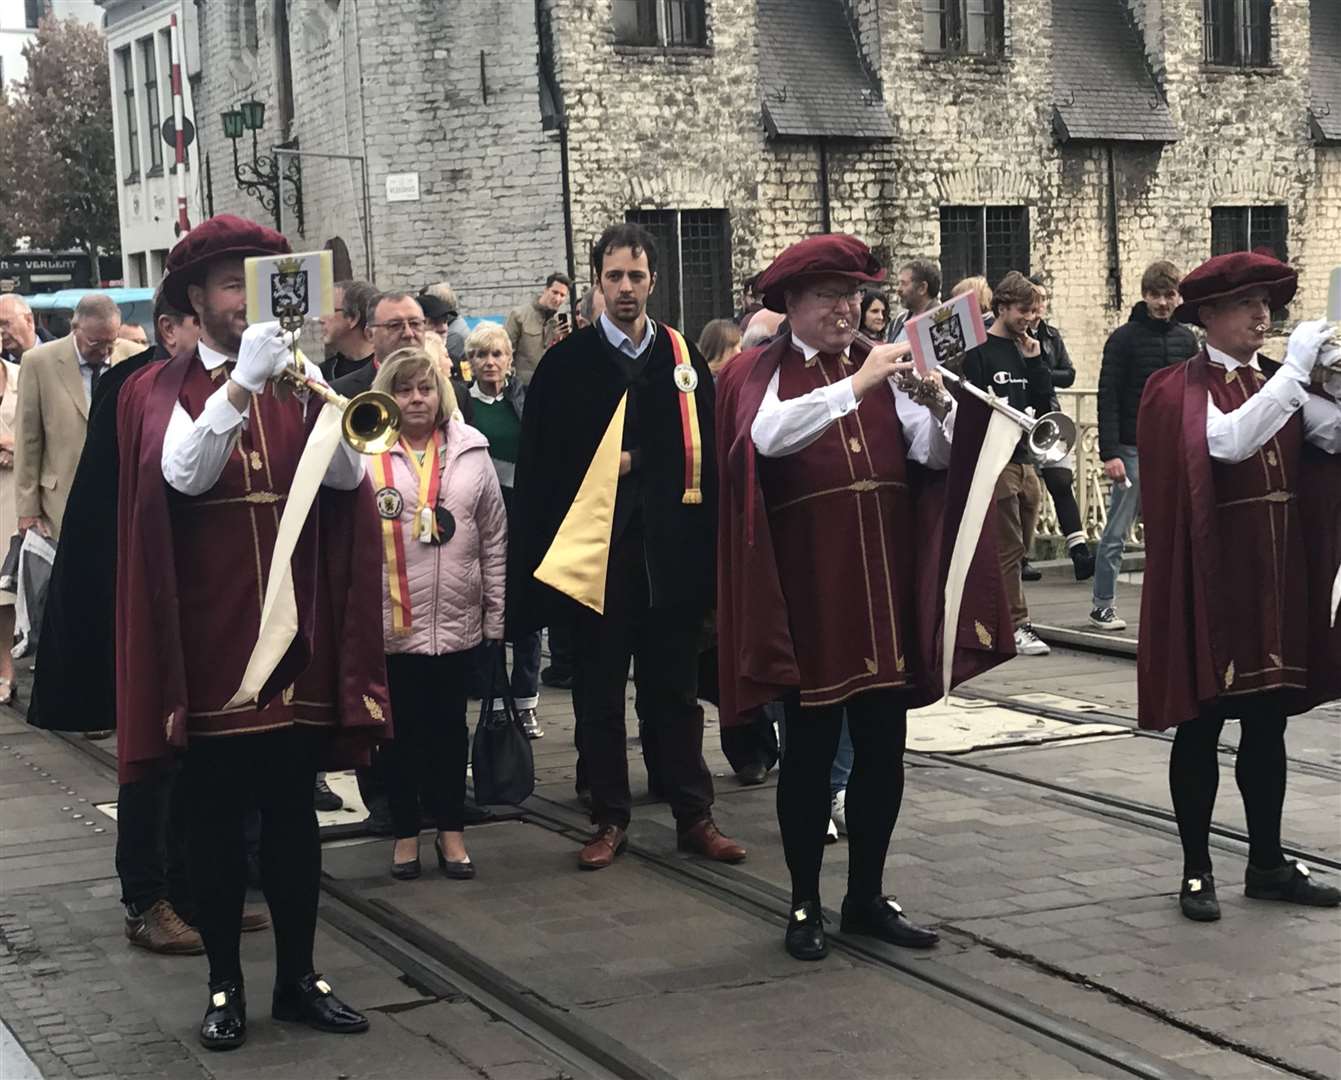 A parade in Ghent